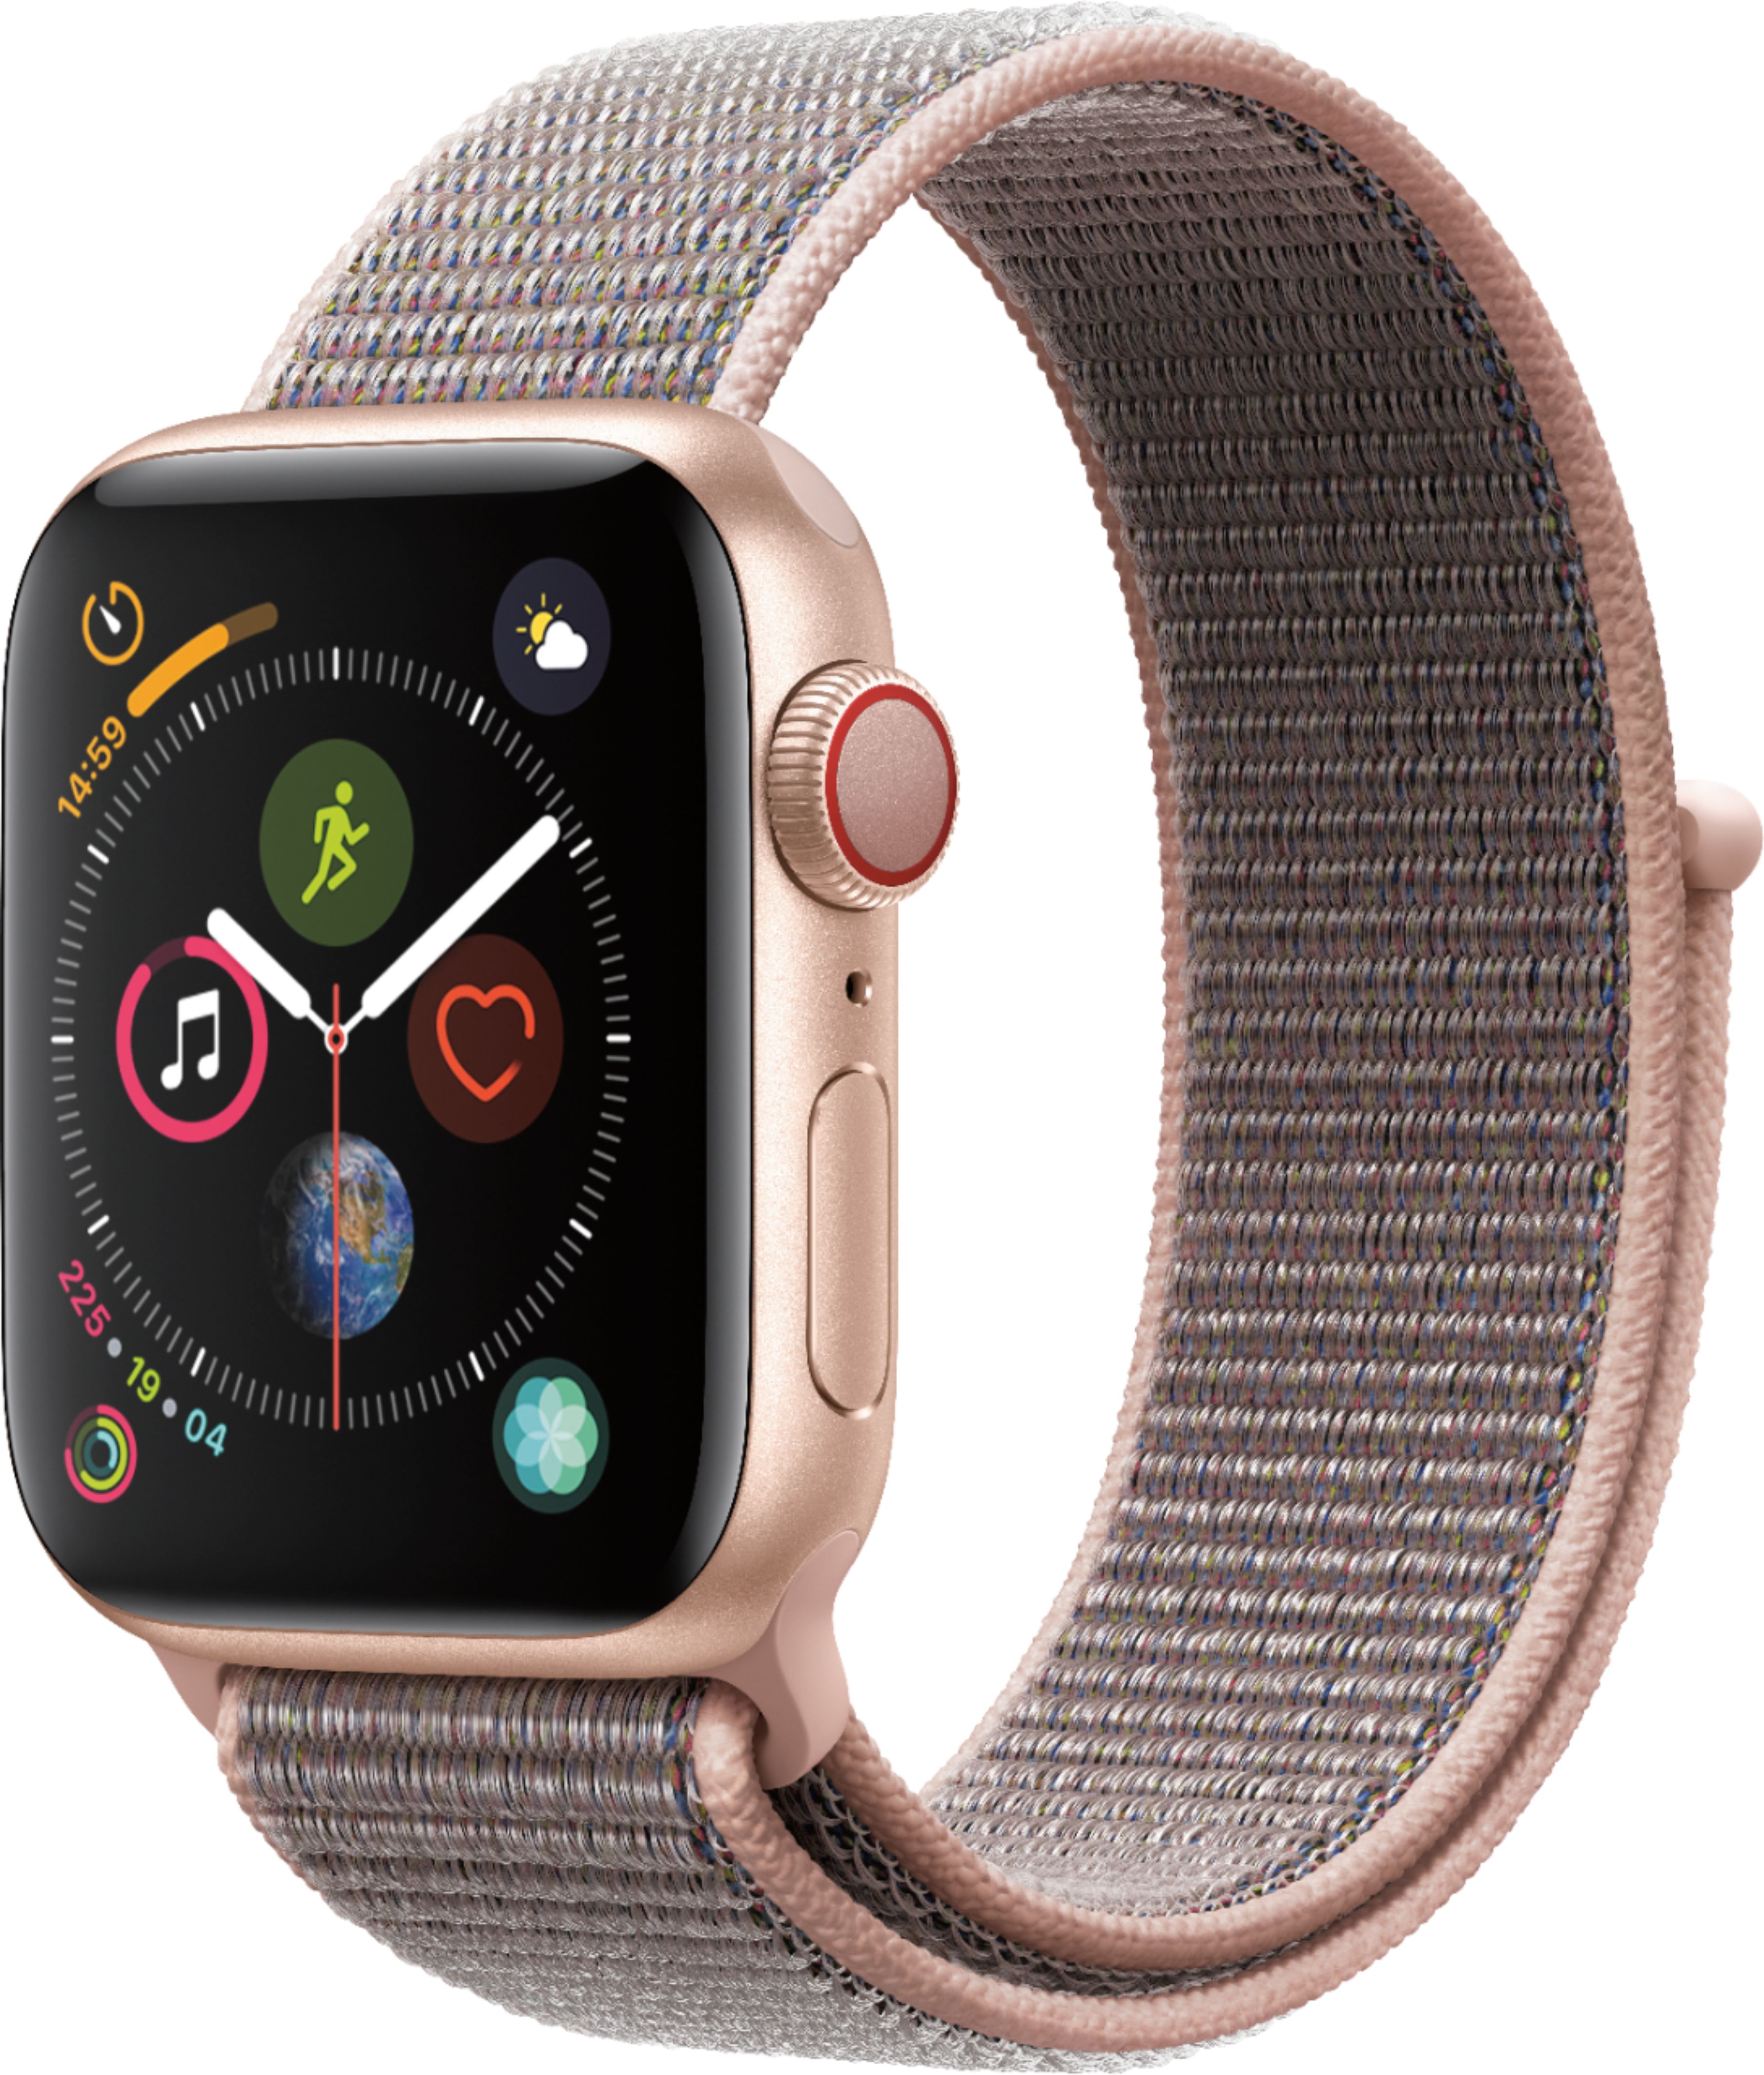 øjenvipper vokal spørgeskema Apple Watch Series 4 (GPS + Cellular) 40mm Gold Aluminum Case with Pink  Sand Sport Loop Gold Aluminum (AT&T) MTUK2LL/A - Best Buy